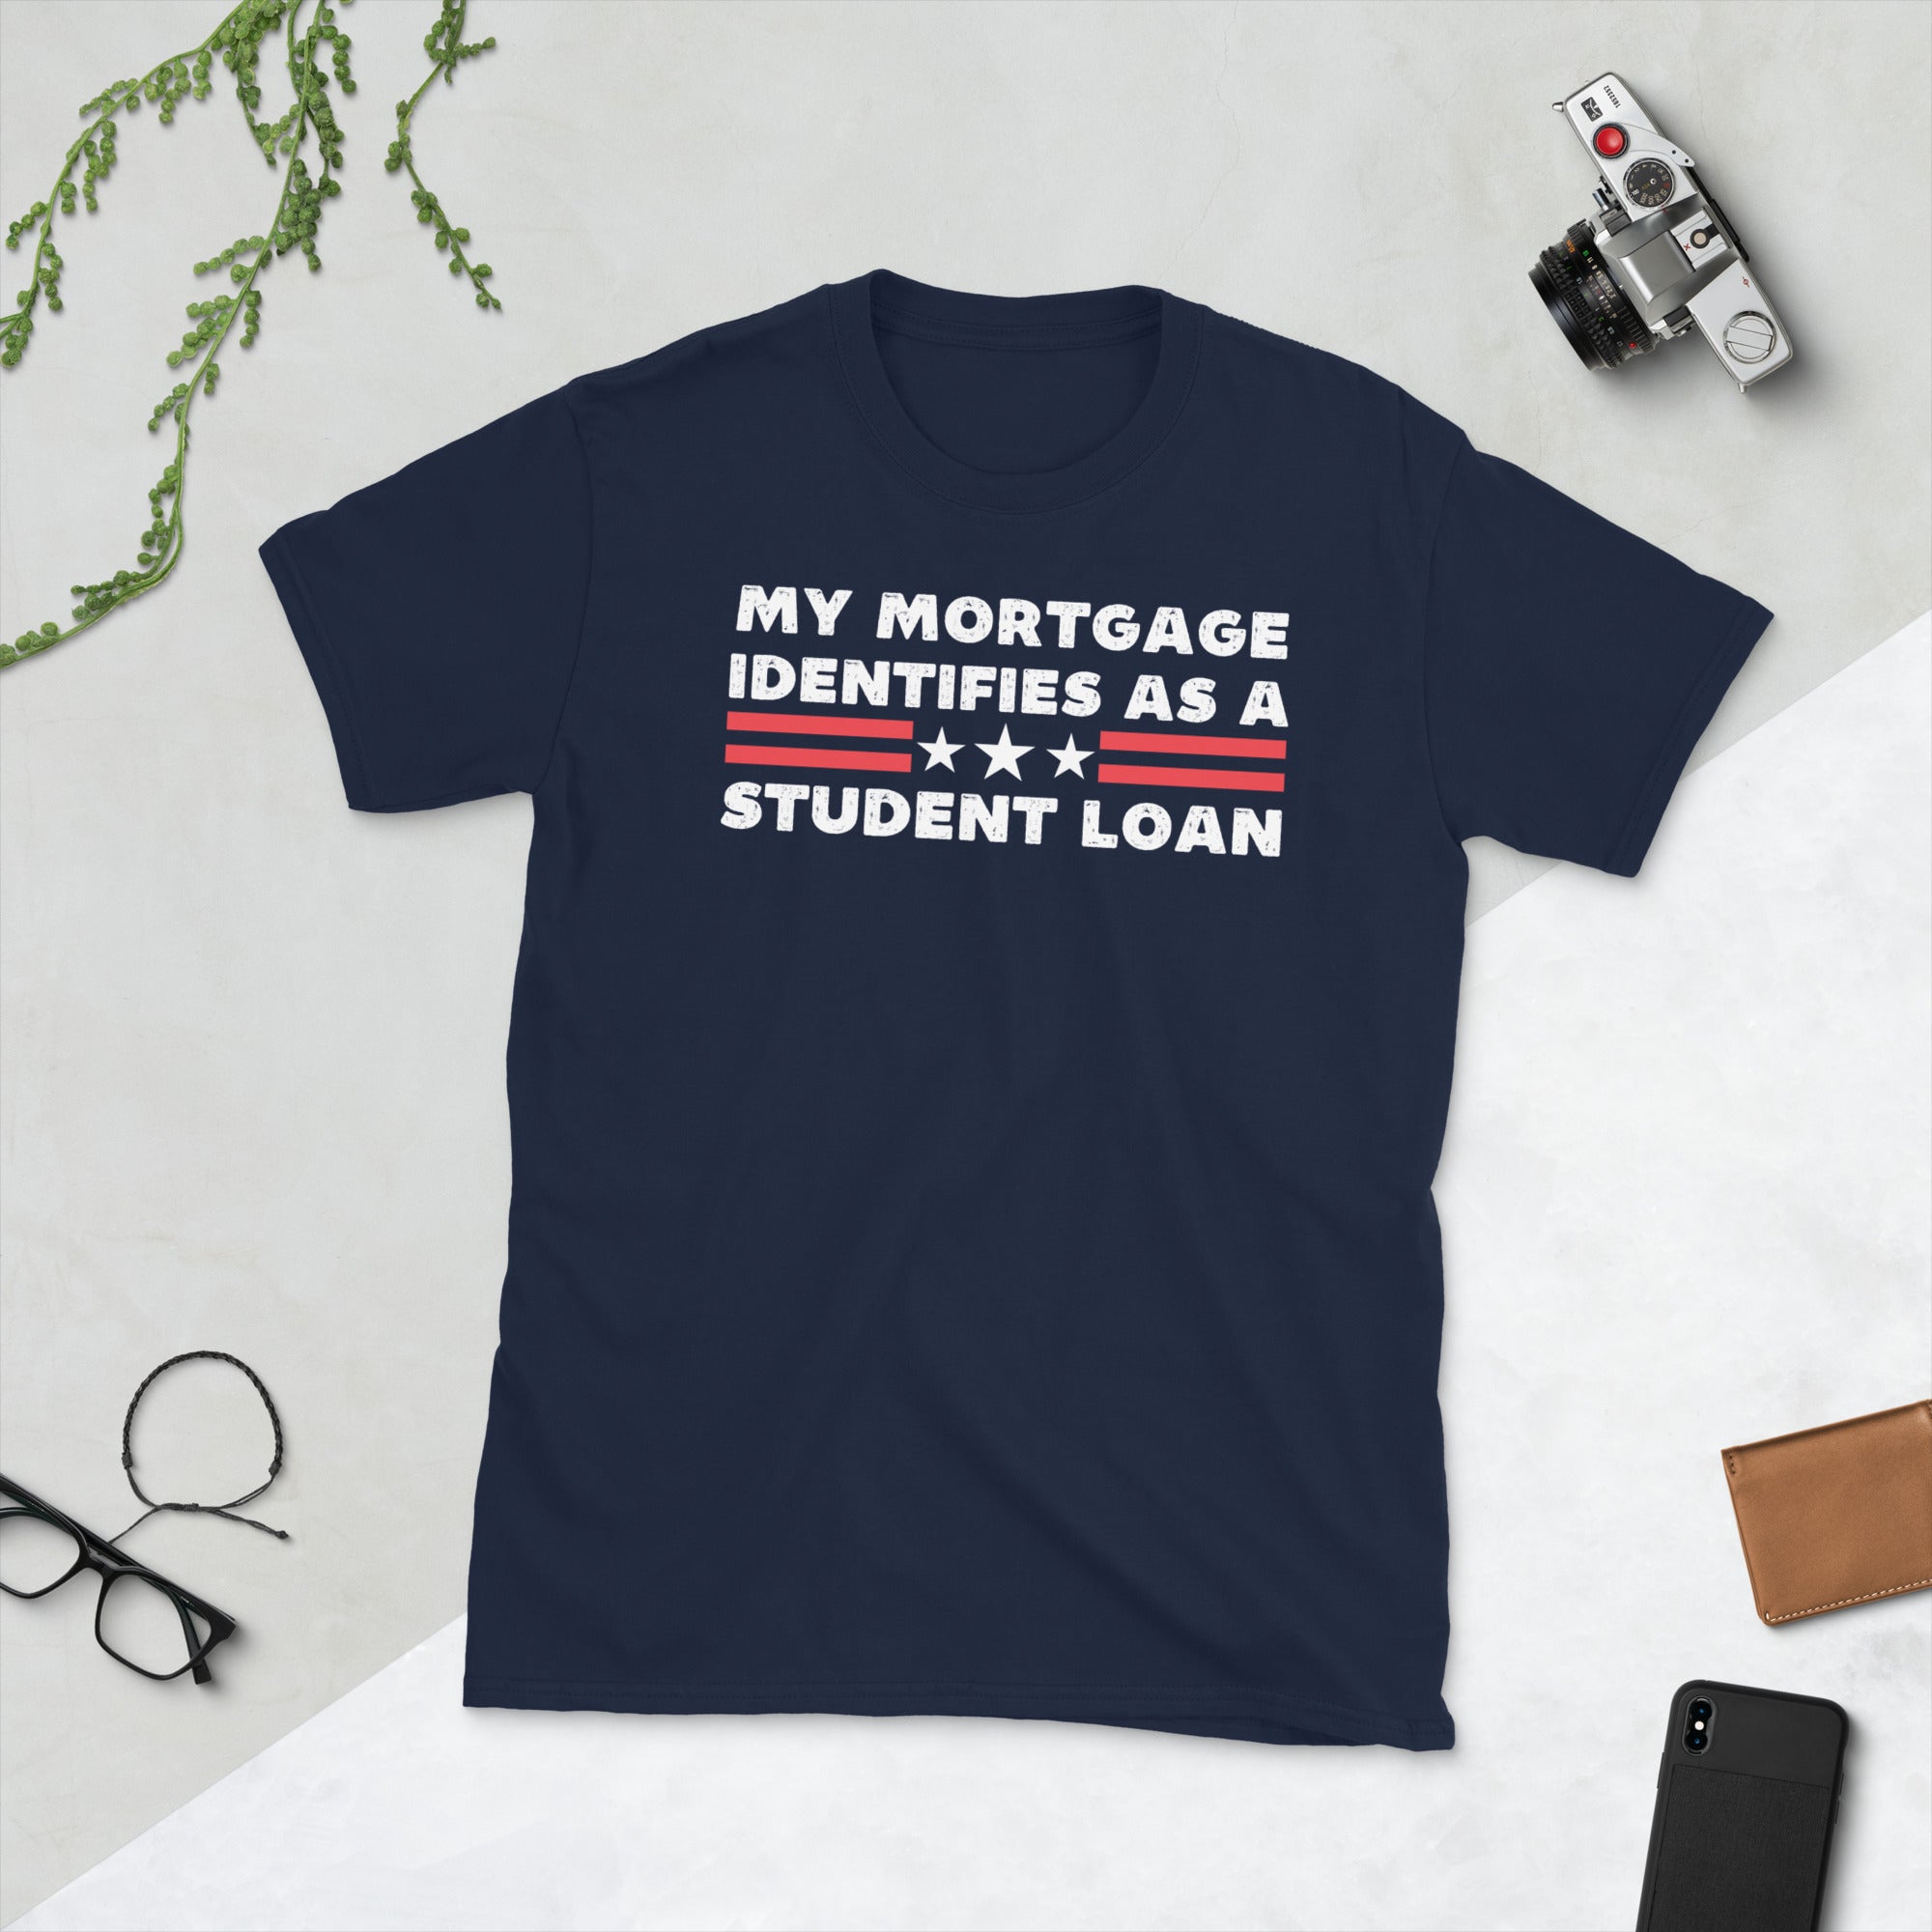 My Mortgage Identifies As A Student Loan, Funny Republican Shirt, Student Loan Forgiveness, FJB Shirt, American Patriot, College Students